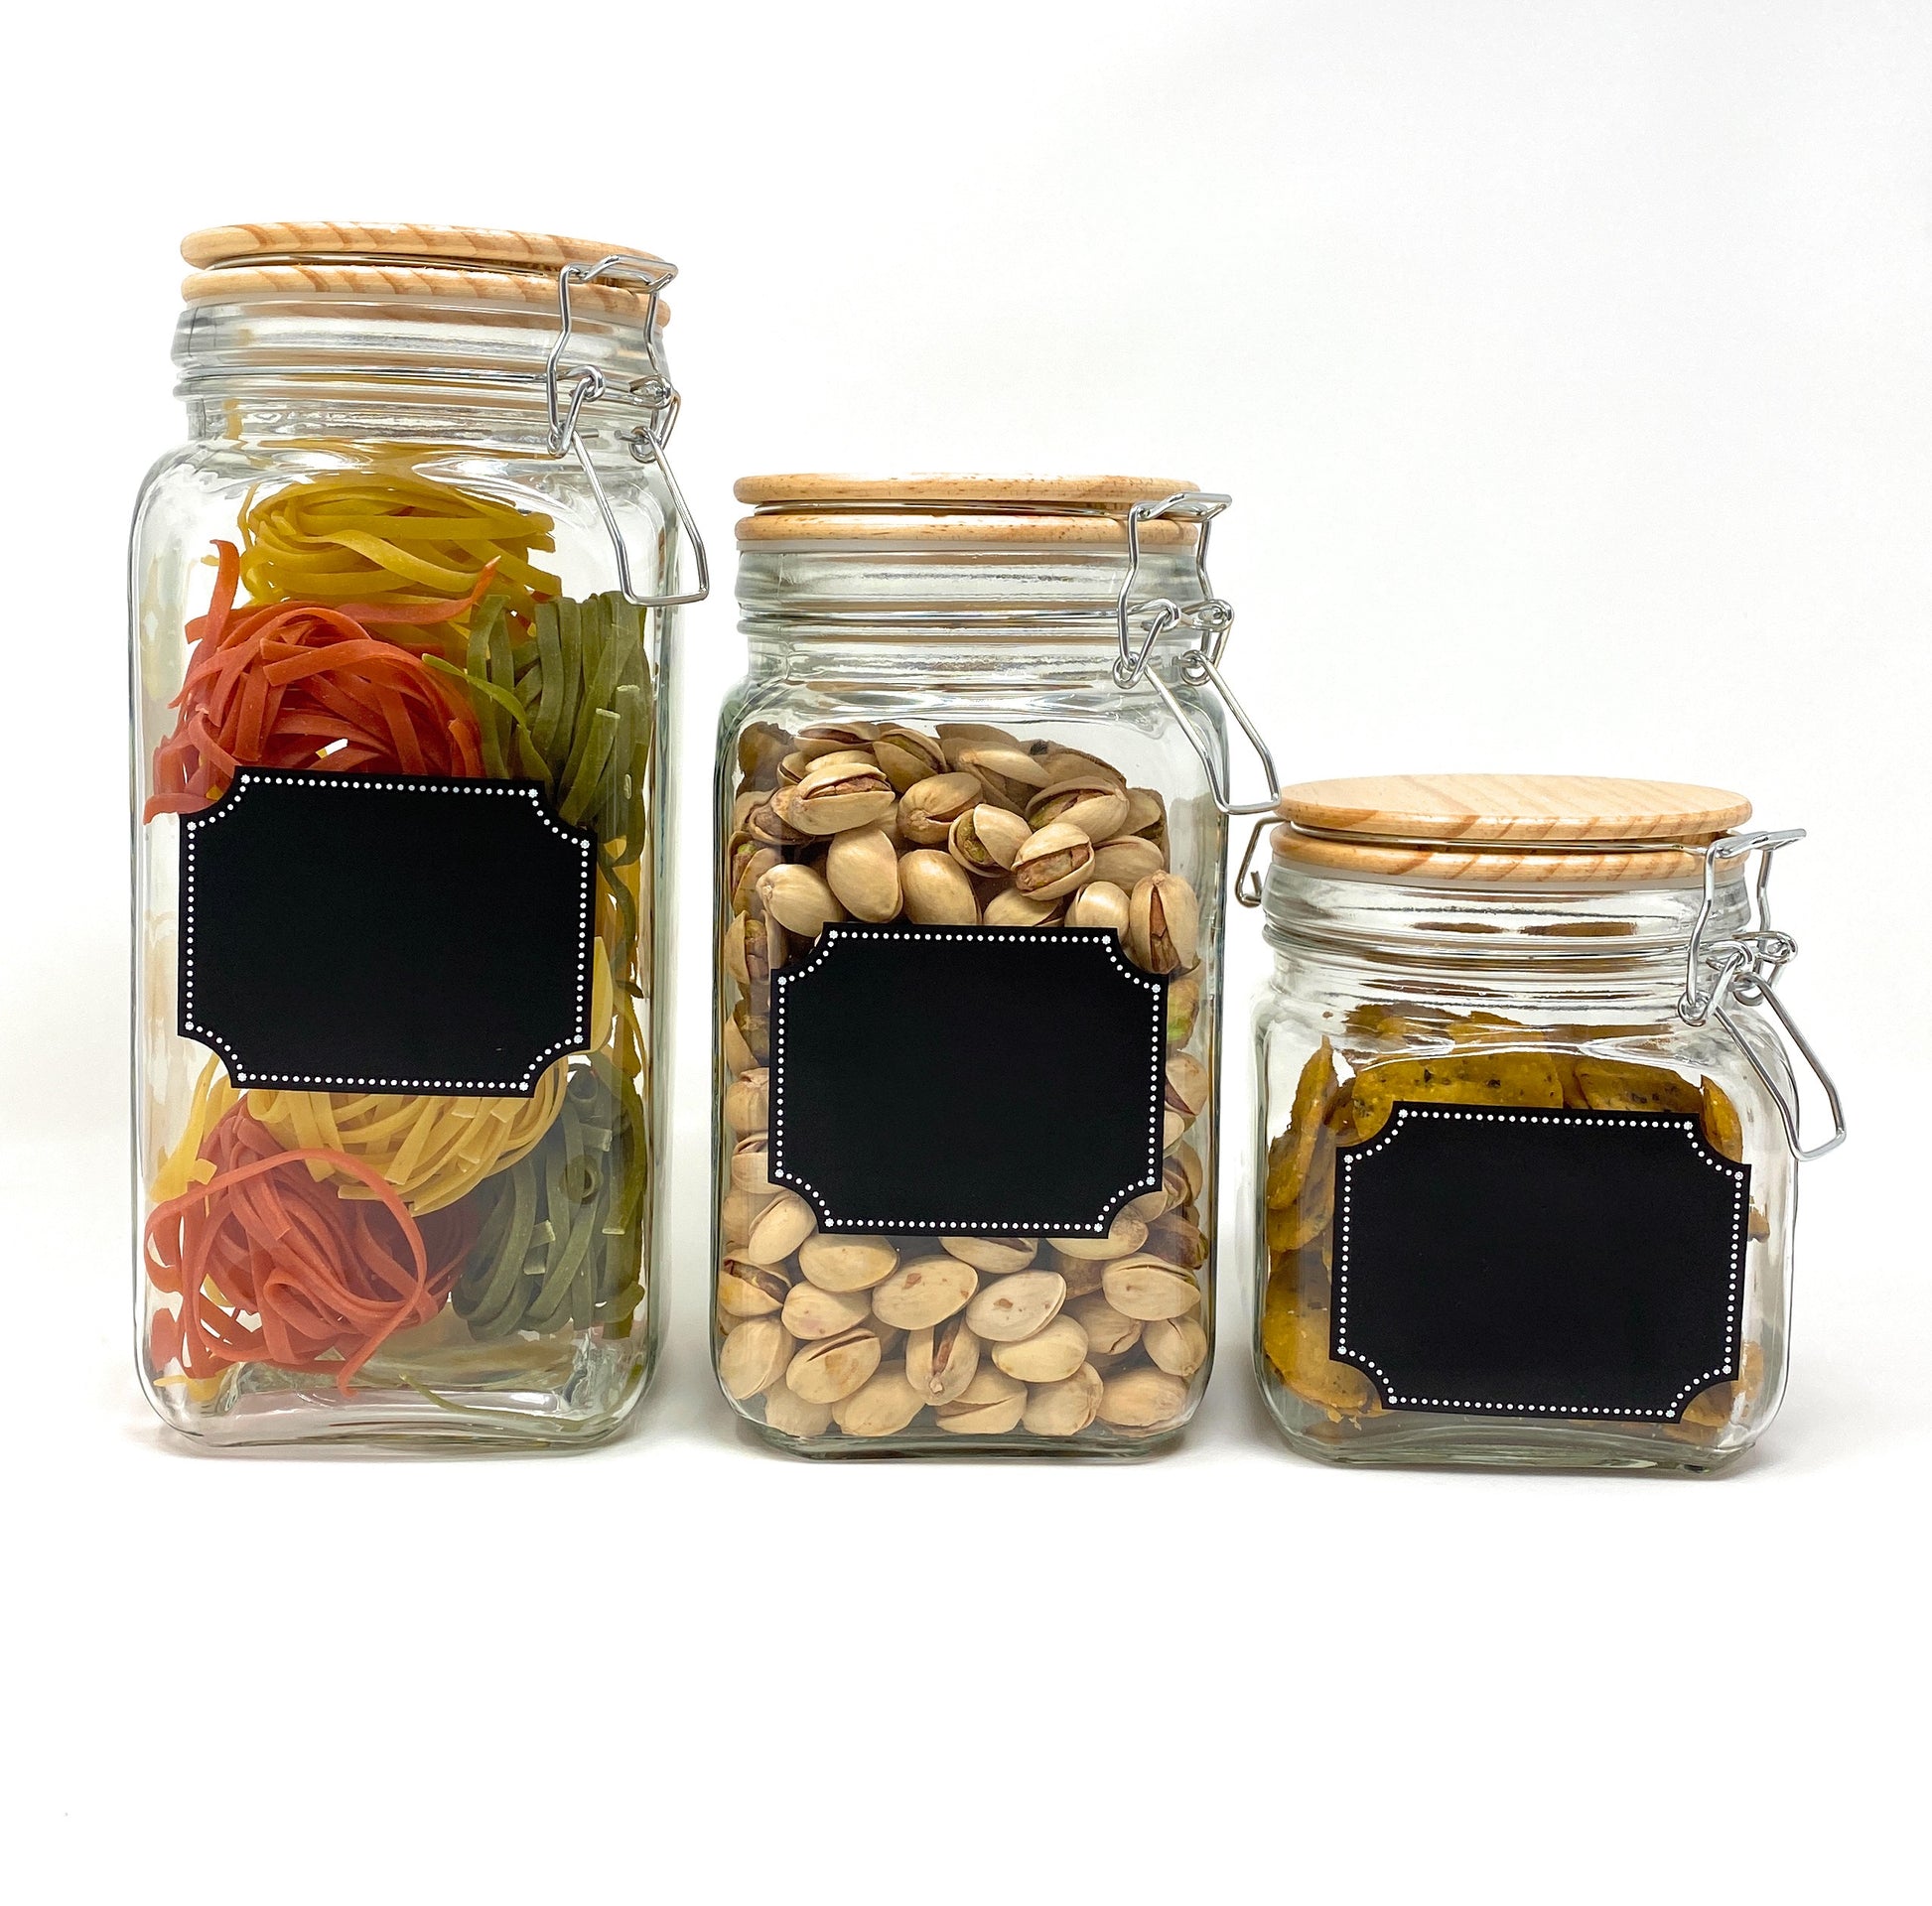 3pcs/set Glass Jar Set With Airtight Lid And Chalkboard Label, Apothecary  Glass Food Storage Jar Kit - 3 Large Cookie Jars, Candies, Coffee, Flour,  Sugar, Rice, Pasta, Cereals, Transparent Storage Container For